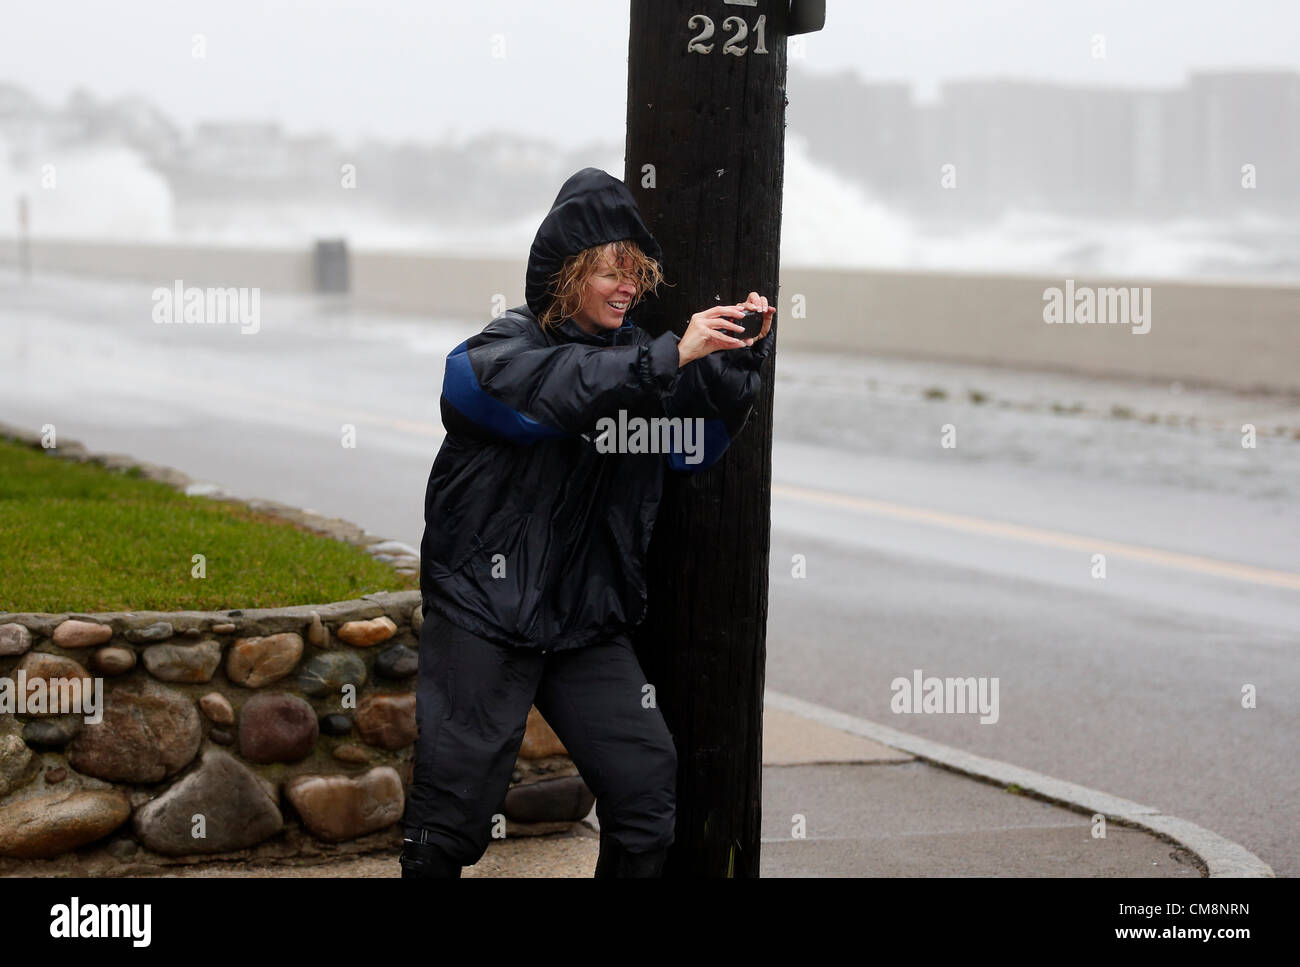 Winthrop, Massachusetts, USA. A woman braces herself against the wind from Hurricane Sandy as she photographs the waves coming ashore in Winthrop, Massachusetts, Monday, Oct. 29, 2012. The huge weather system  is predicted  to make landfall in southern New Jersey late Monday and is affecting weather up and down the East Coast of the United States. Stock Photo